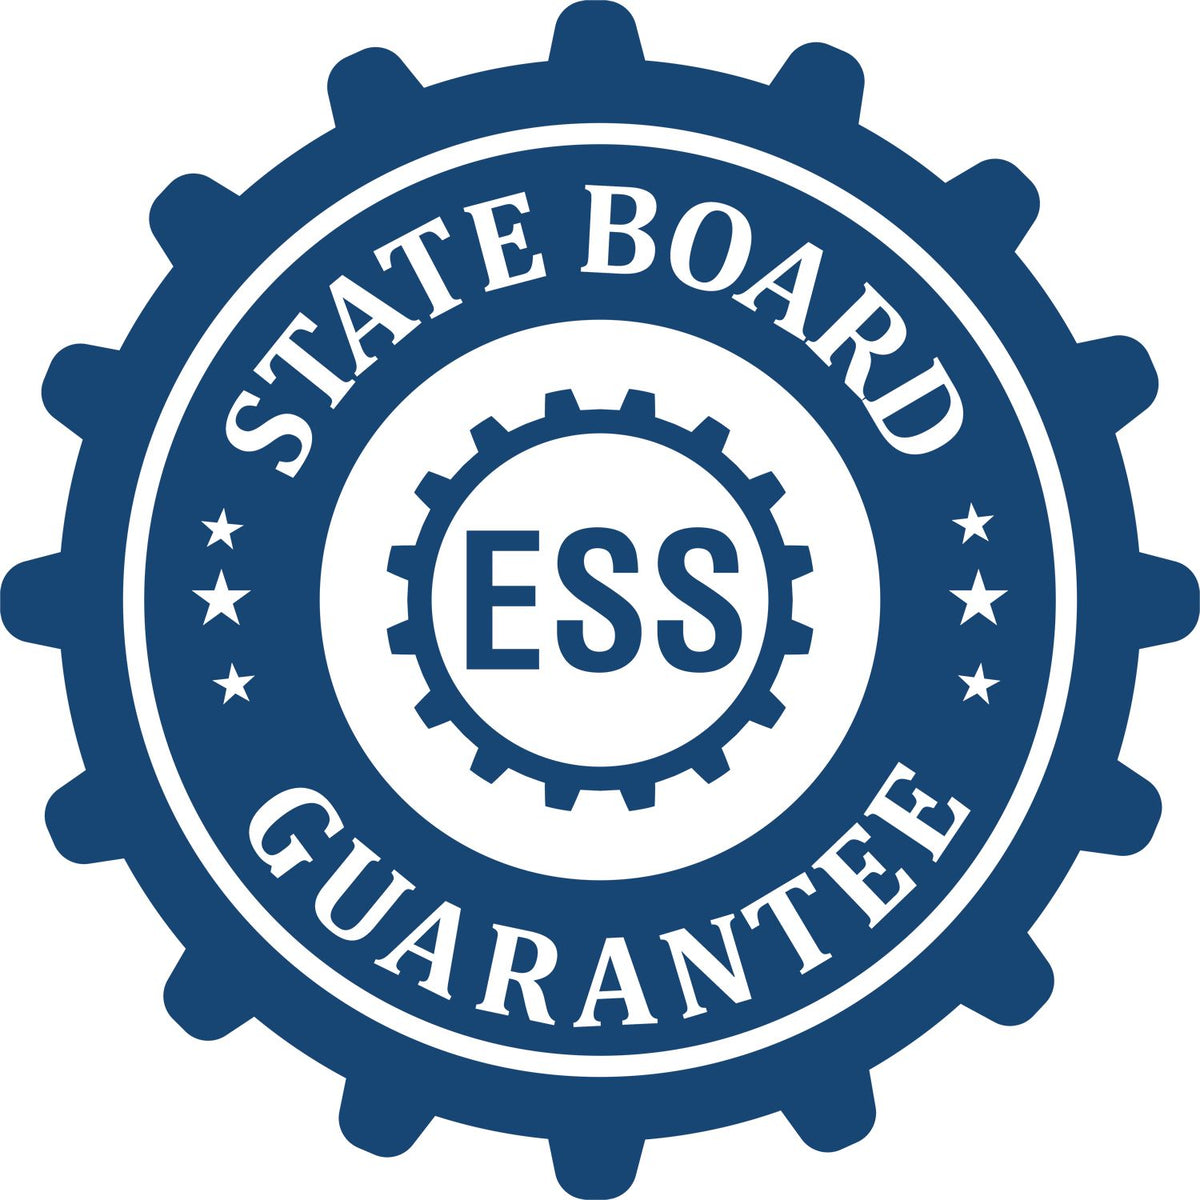 An emblem in a gear shape illustrating a state board guarantee for the Long Reach Delaware Land Surveyor Seal product.